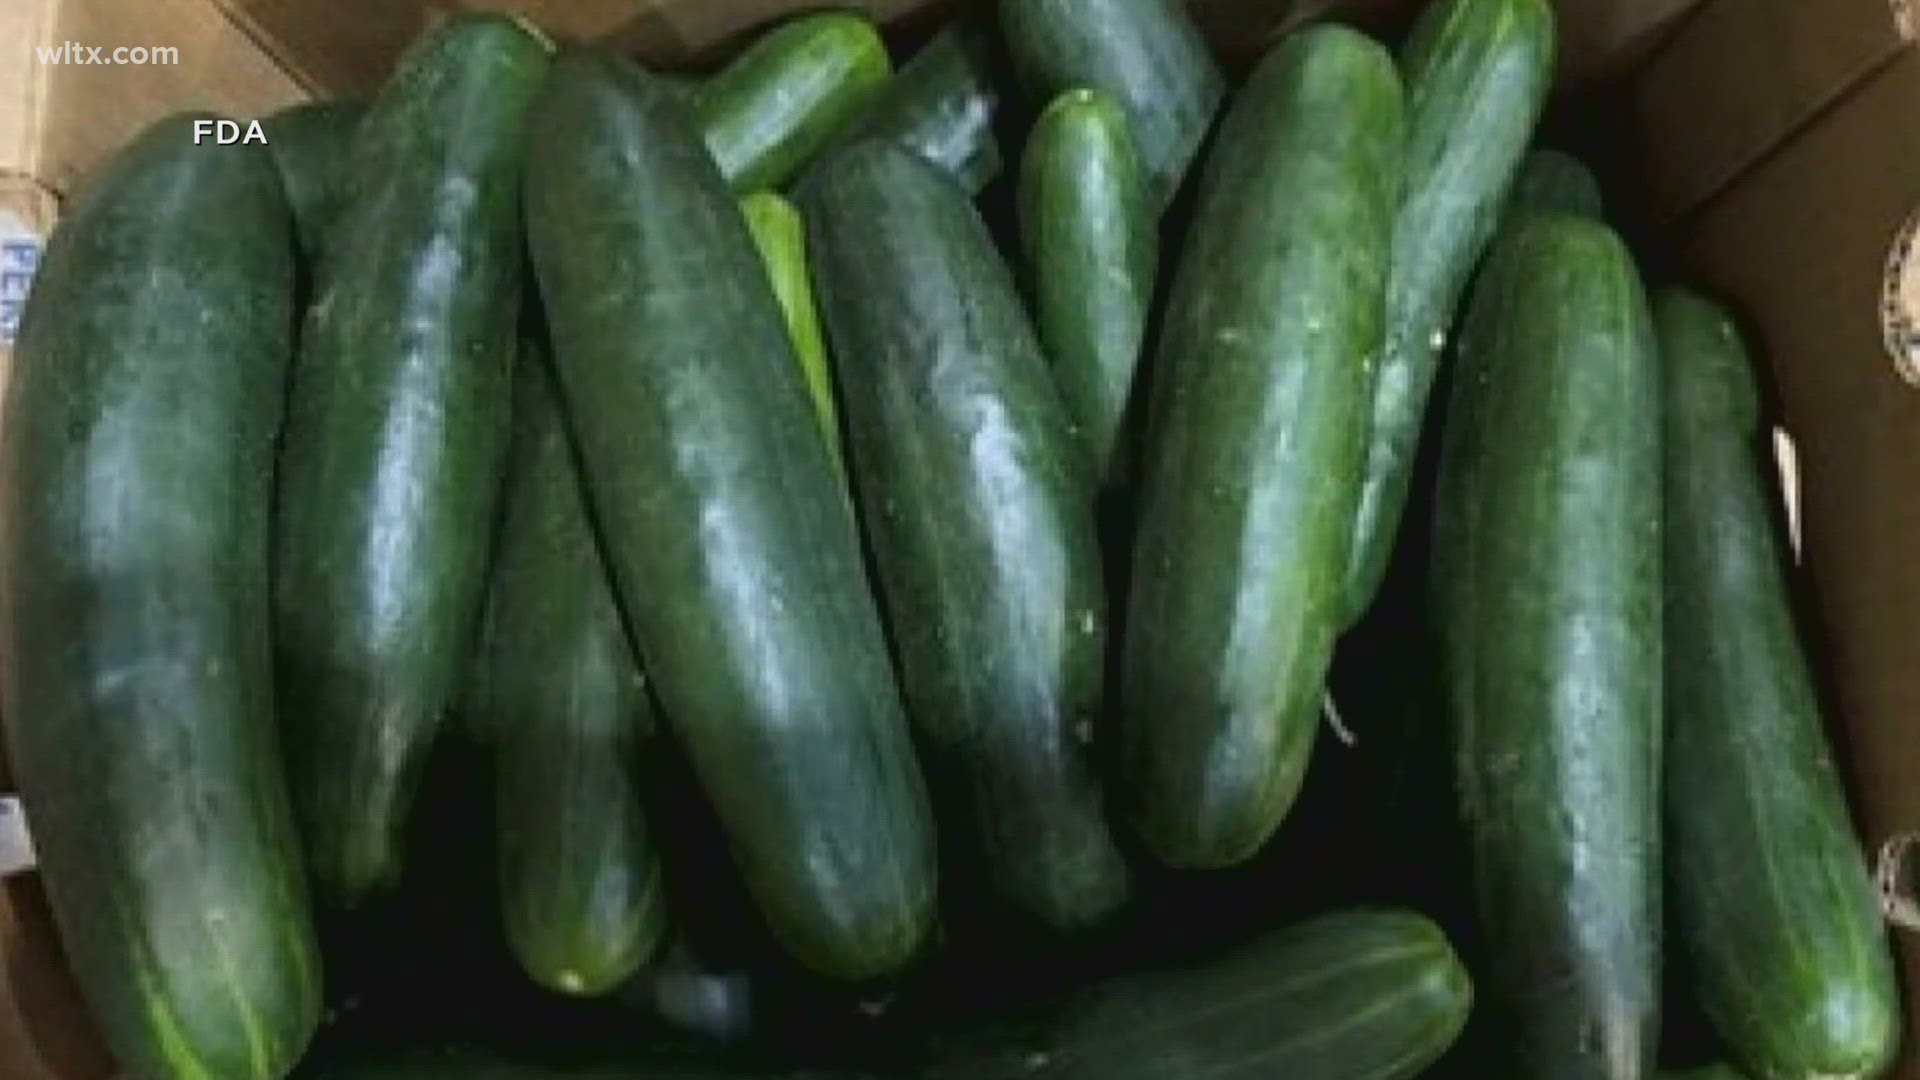 A Florida company is recalling cucumbers shipped to 14 states, including South Carolina, due to the risk of salmonella.